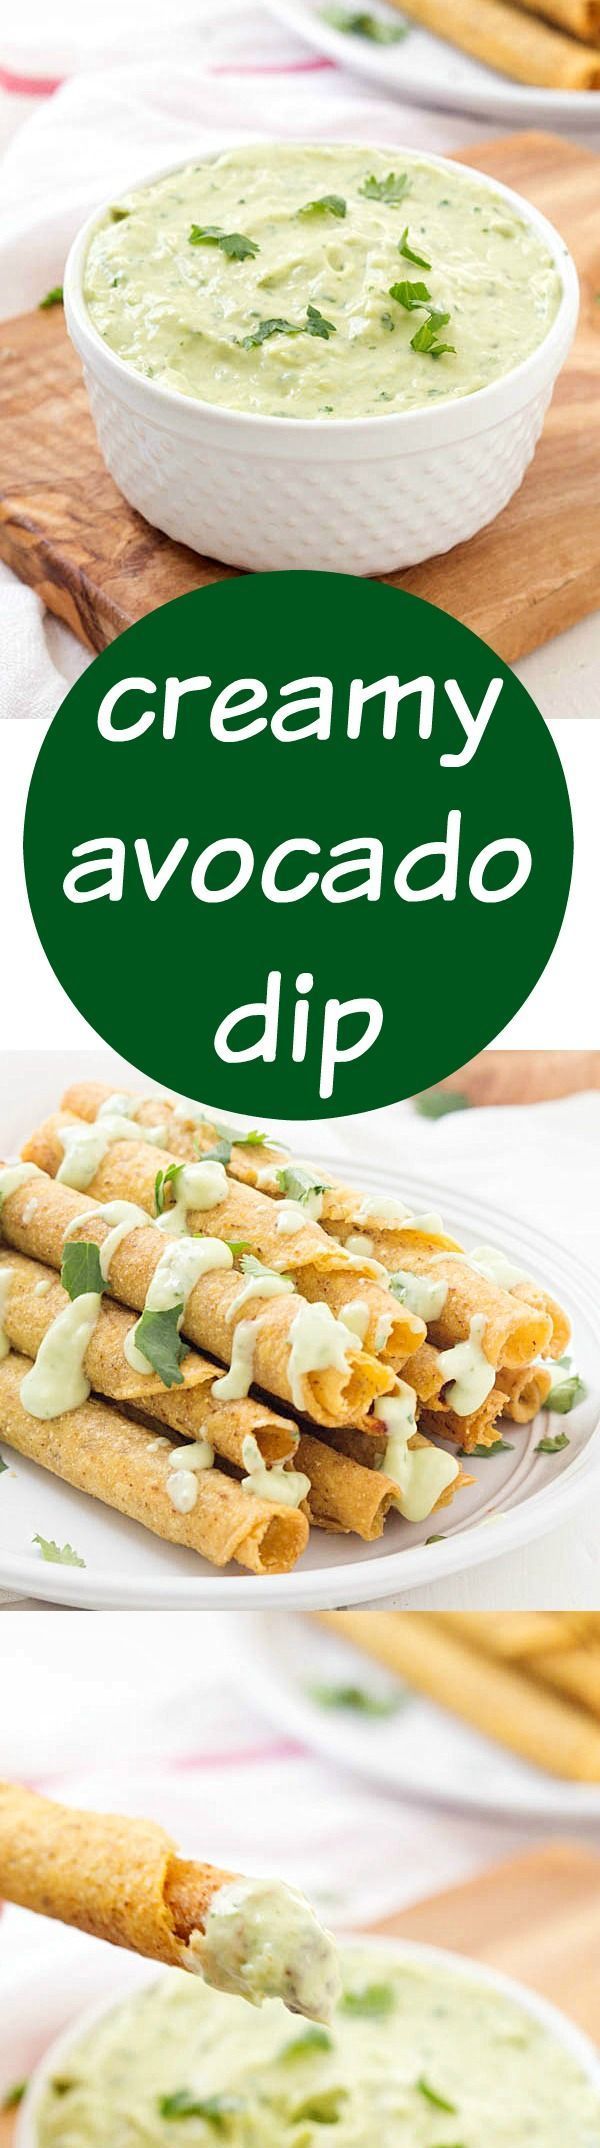 Creamy Avocado Dip Recipe – A fun and unique spin on your traditional appetizer dips! Not only is it delicious, but it’s a